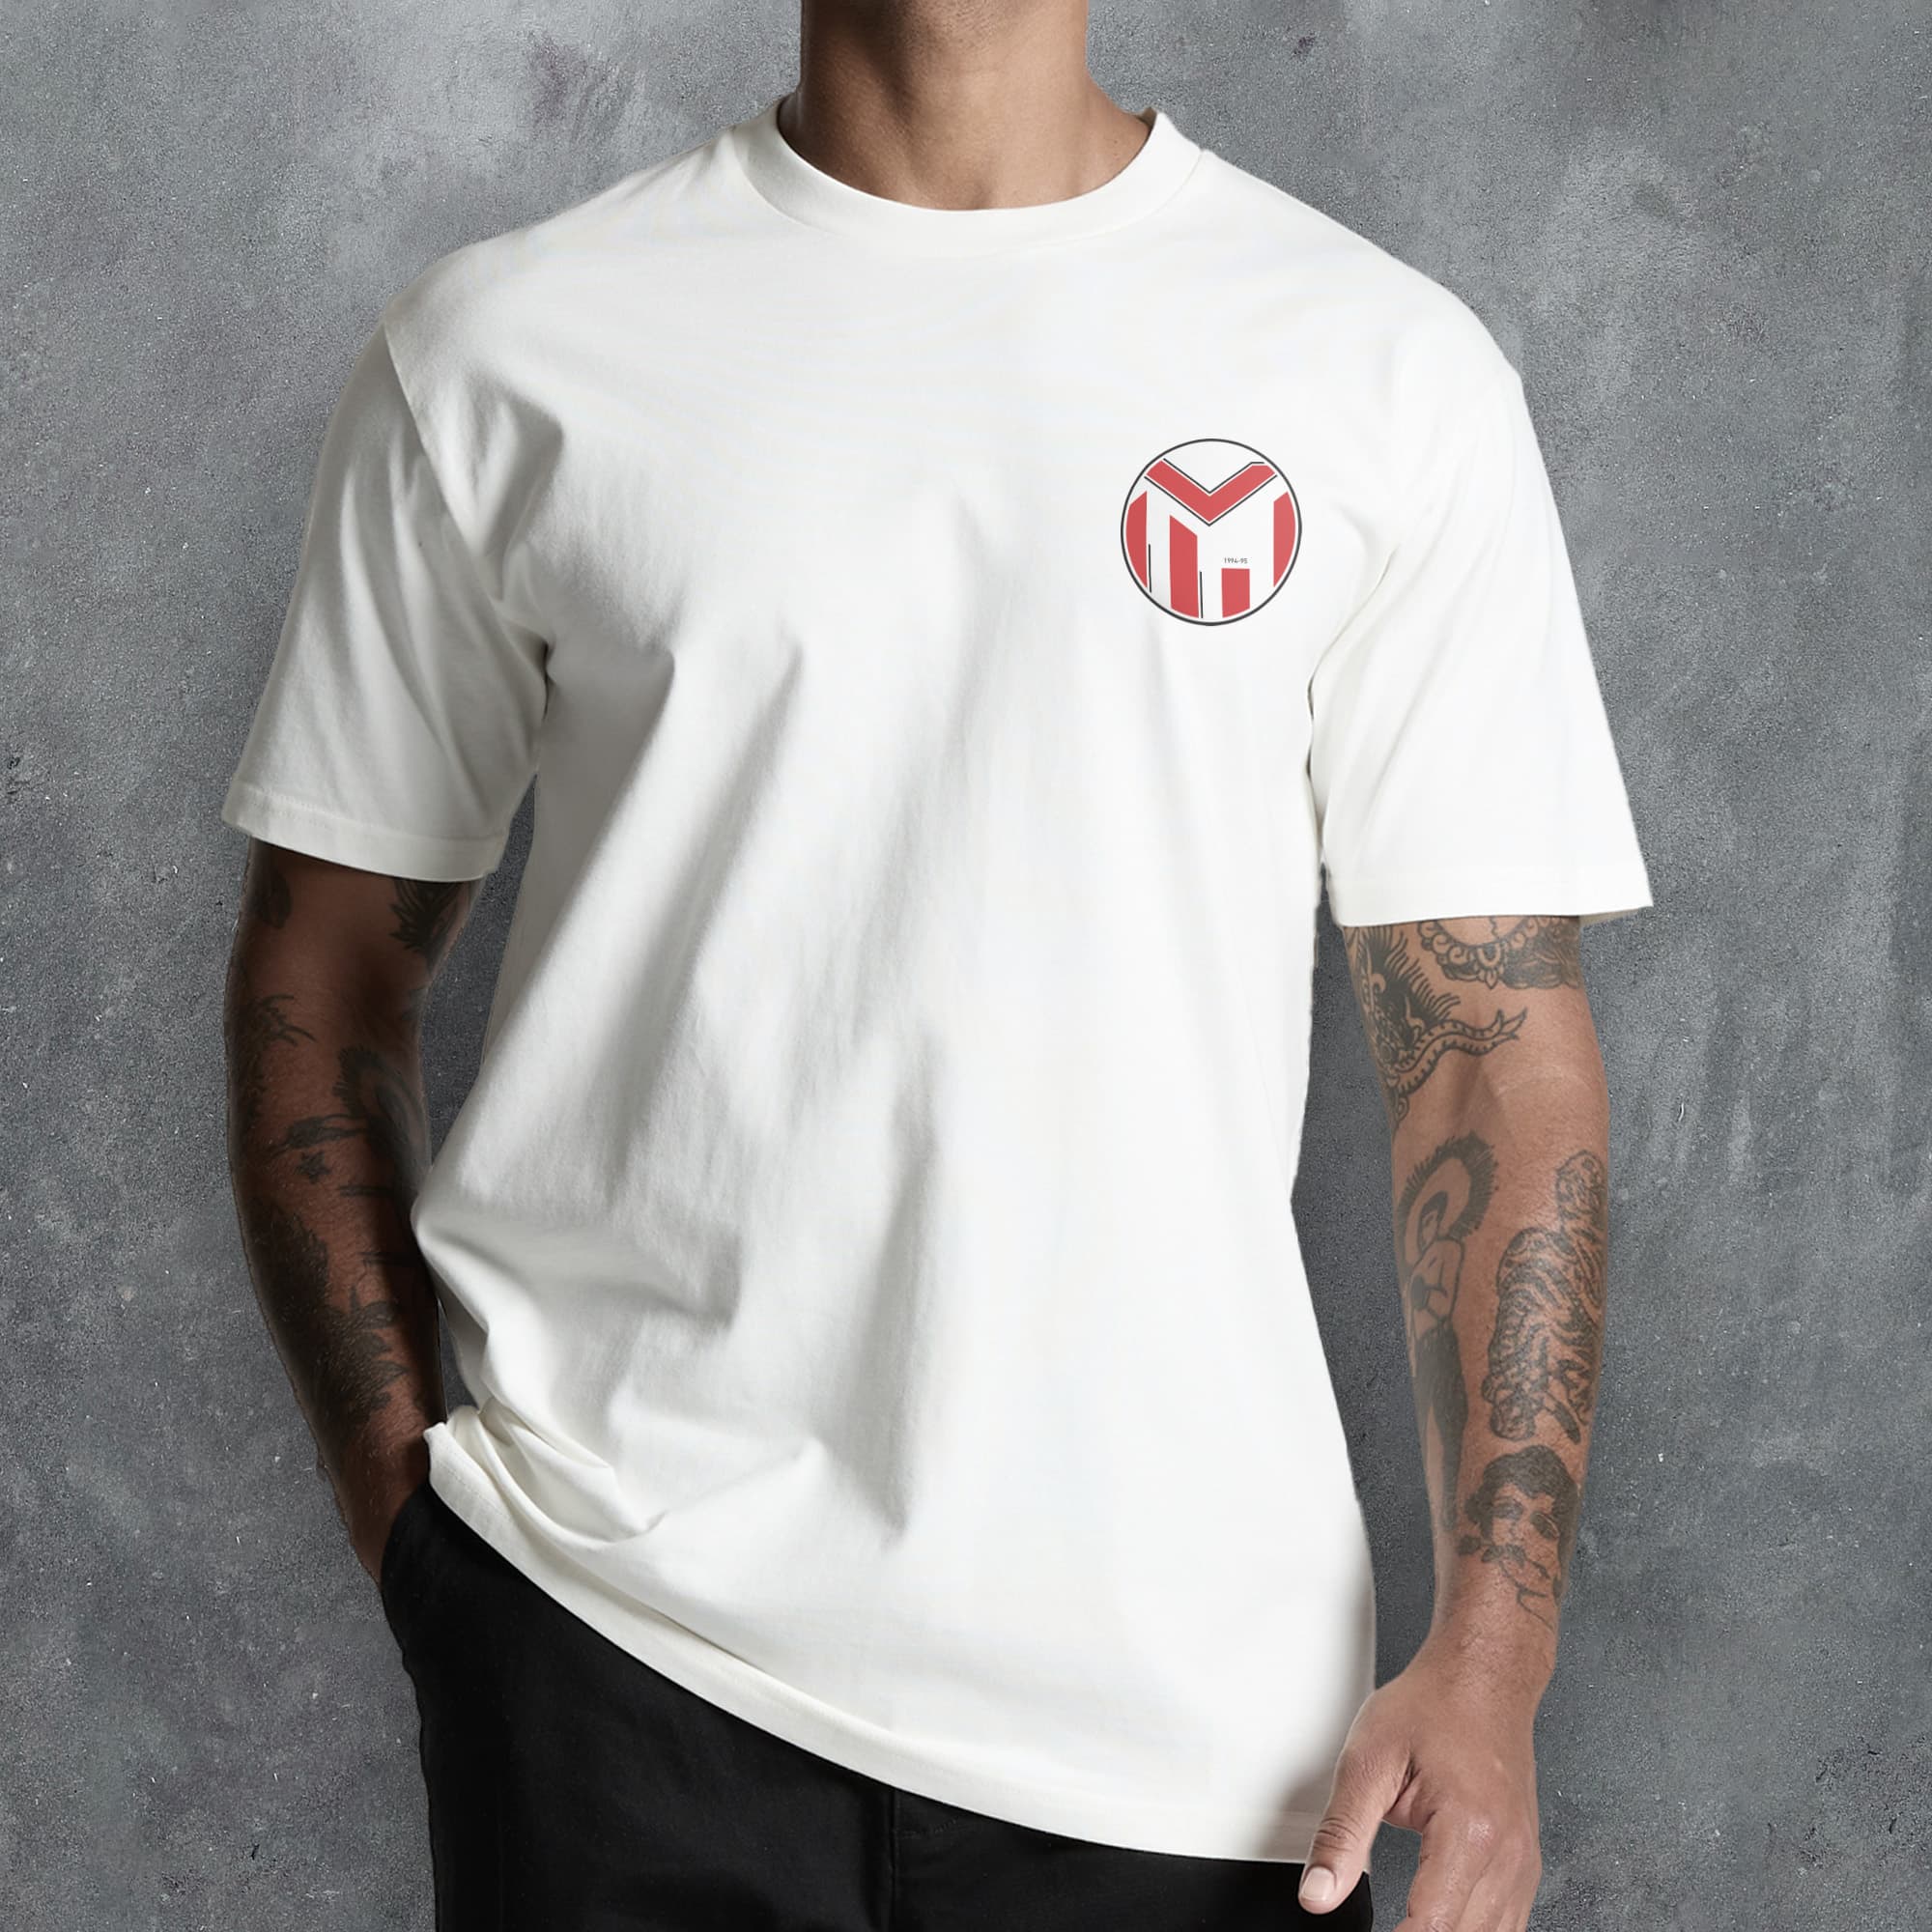 a man wearing a white t - shirt with a red m on it